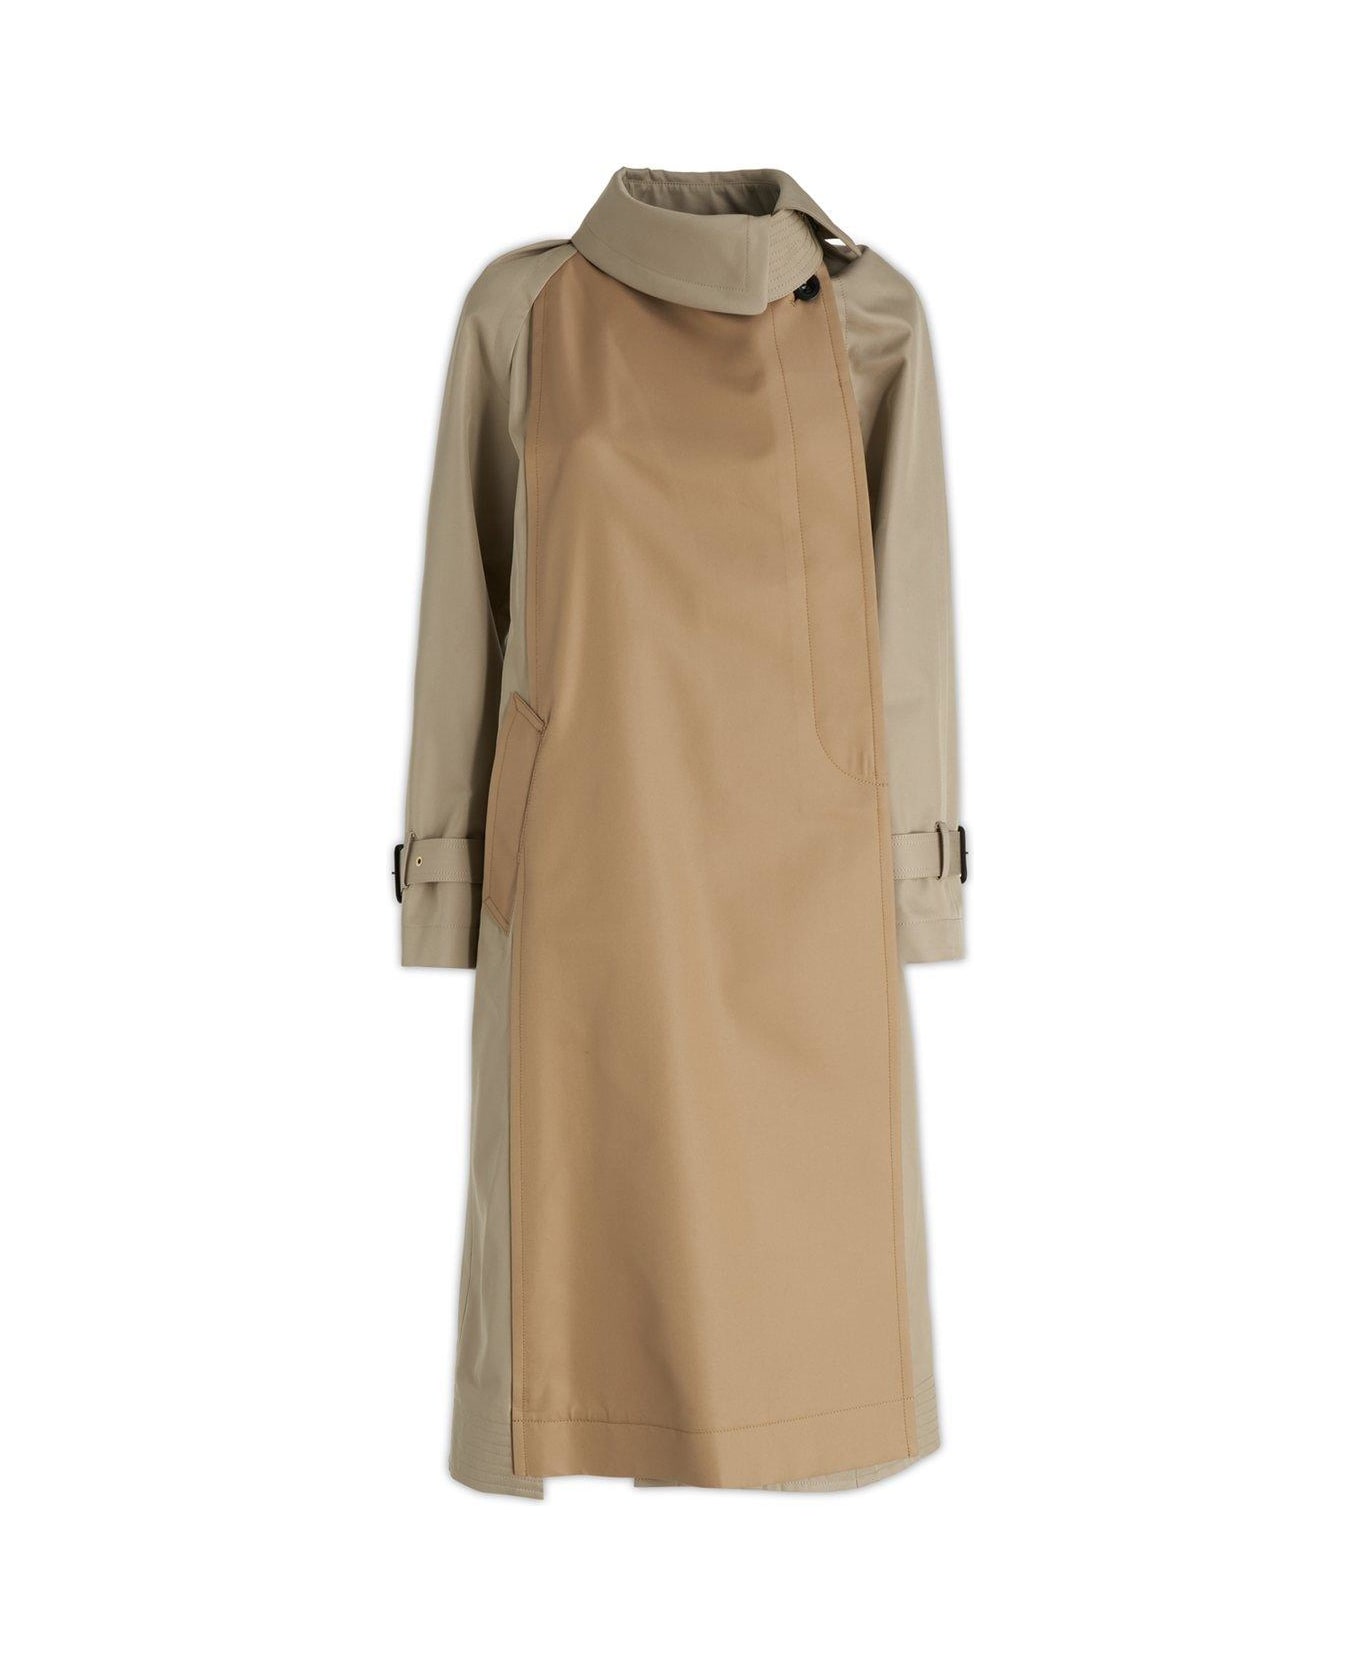 Sacai Two-toned Belted Waist Coat - Beige